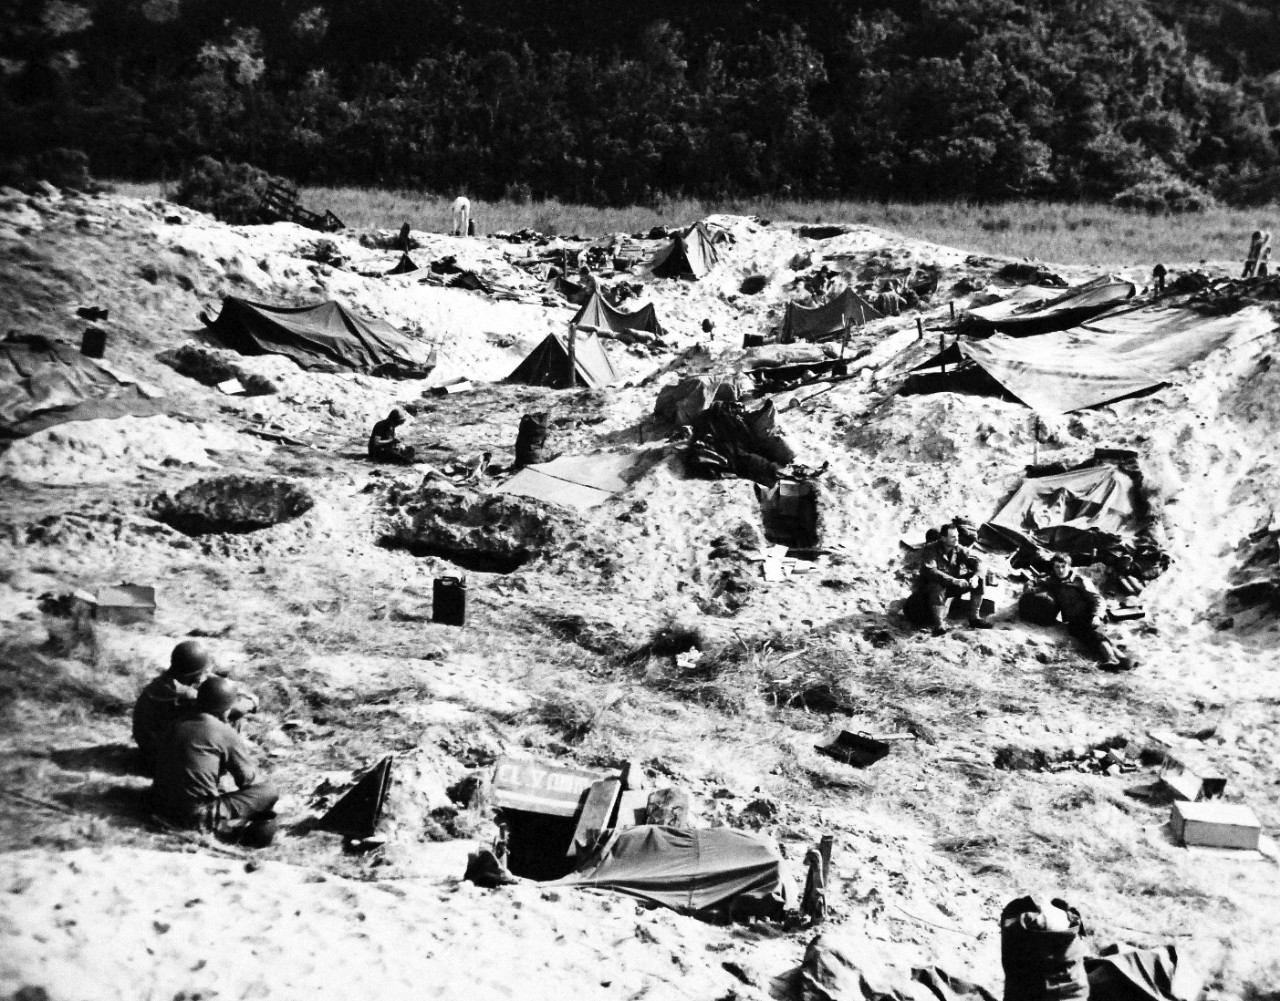 80-G-285226:  Normandy Invasion, June 1944. American troops “dug in” near beach of Normandy, France.  Photograph released November 7, 1944.  U.S. Navy photograph, now in the collections of the National Archives.  (2016/03/15).